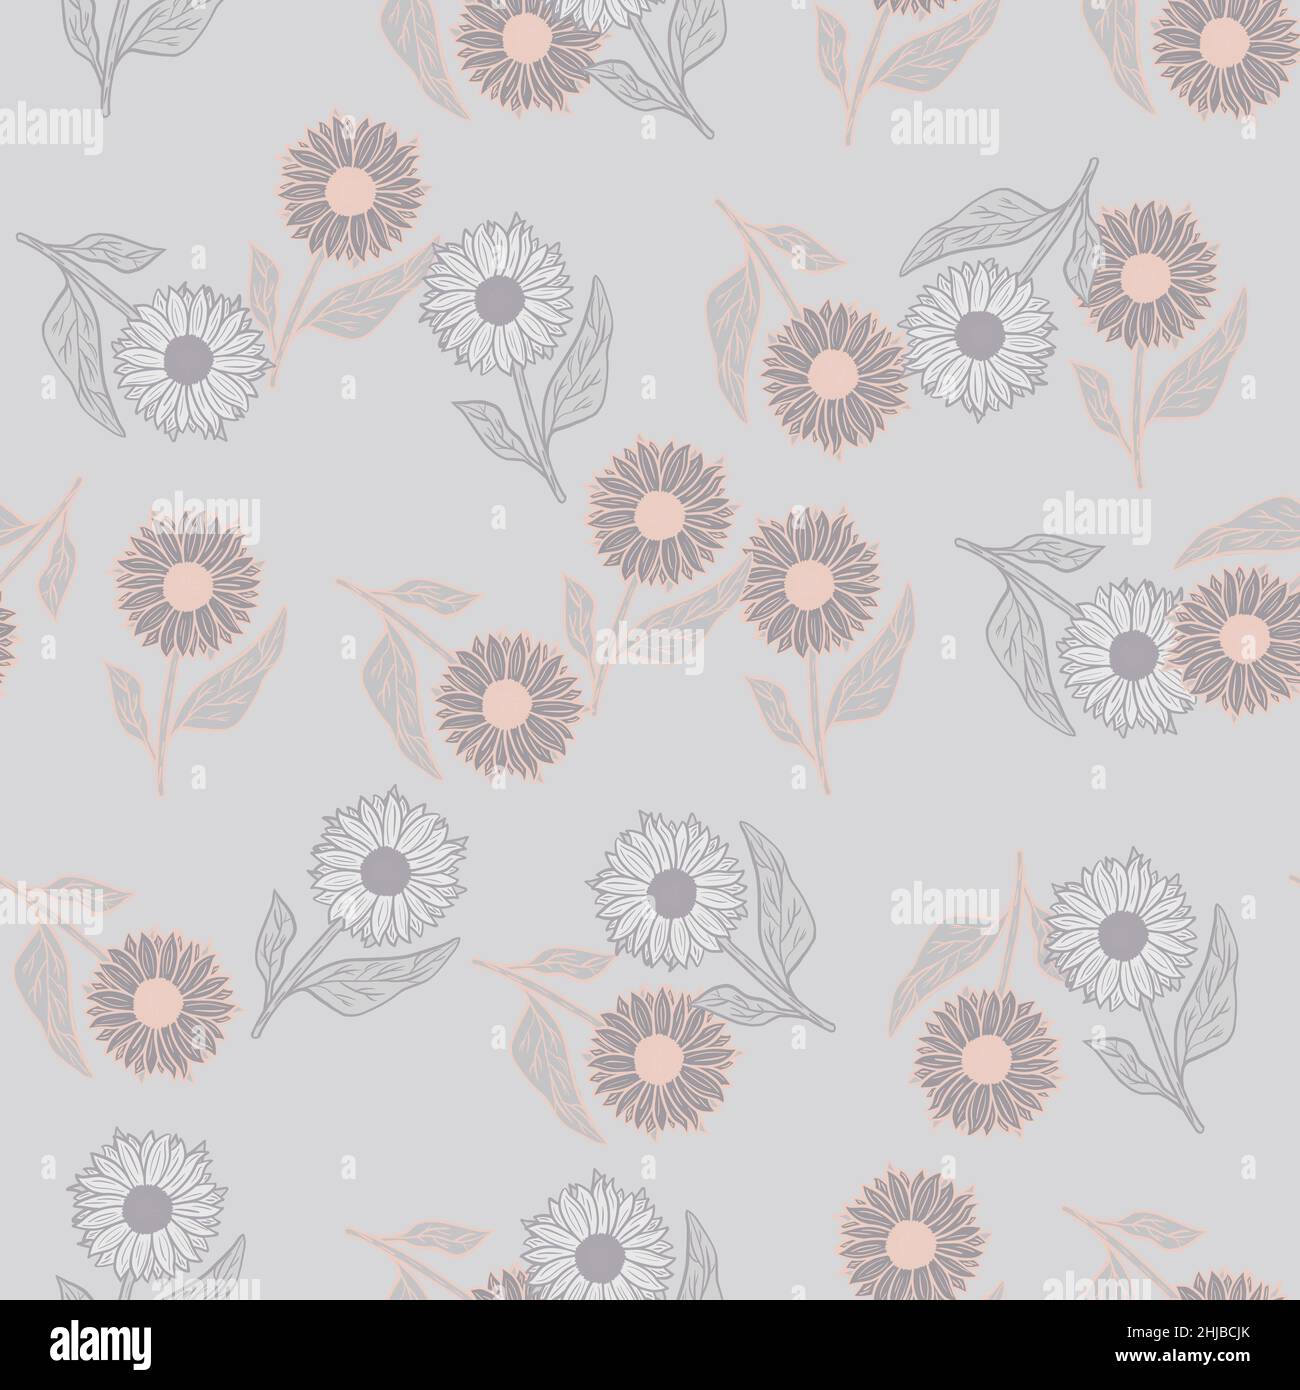 Pale palette seamless pattern with doodle simple sunflowers silhouettes. Scrapbook nature print. Graphic design for wrapping paper and fabric textures Stock Vector